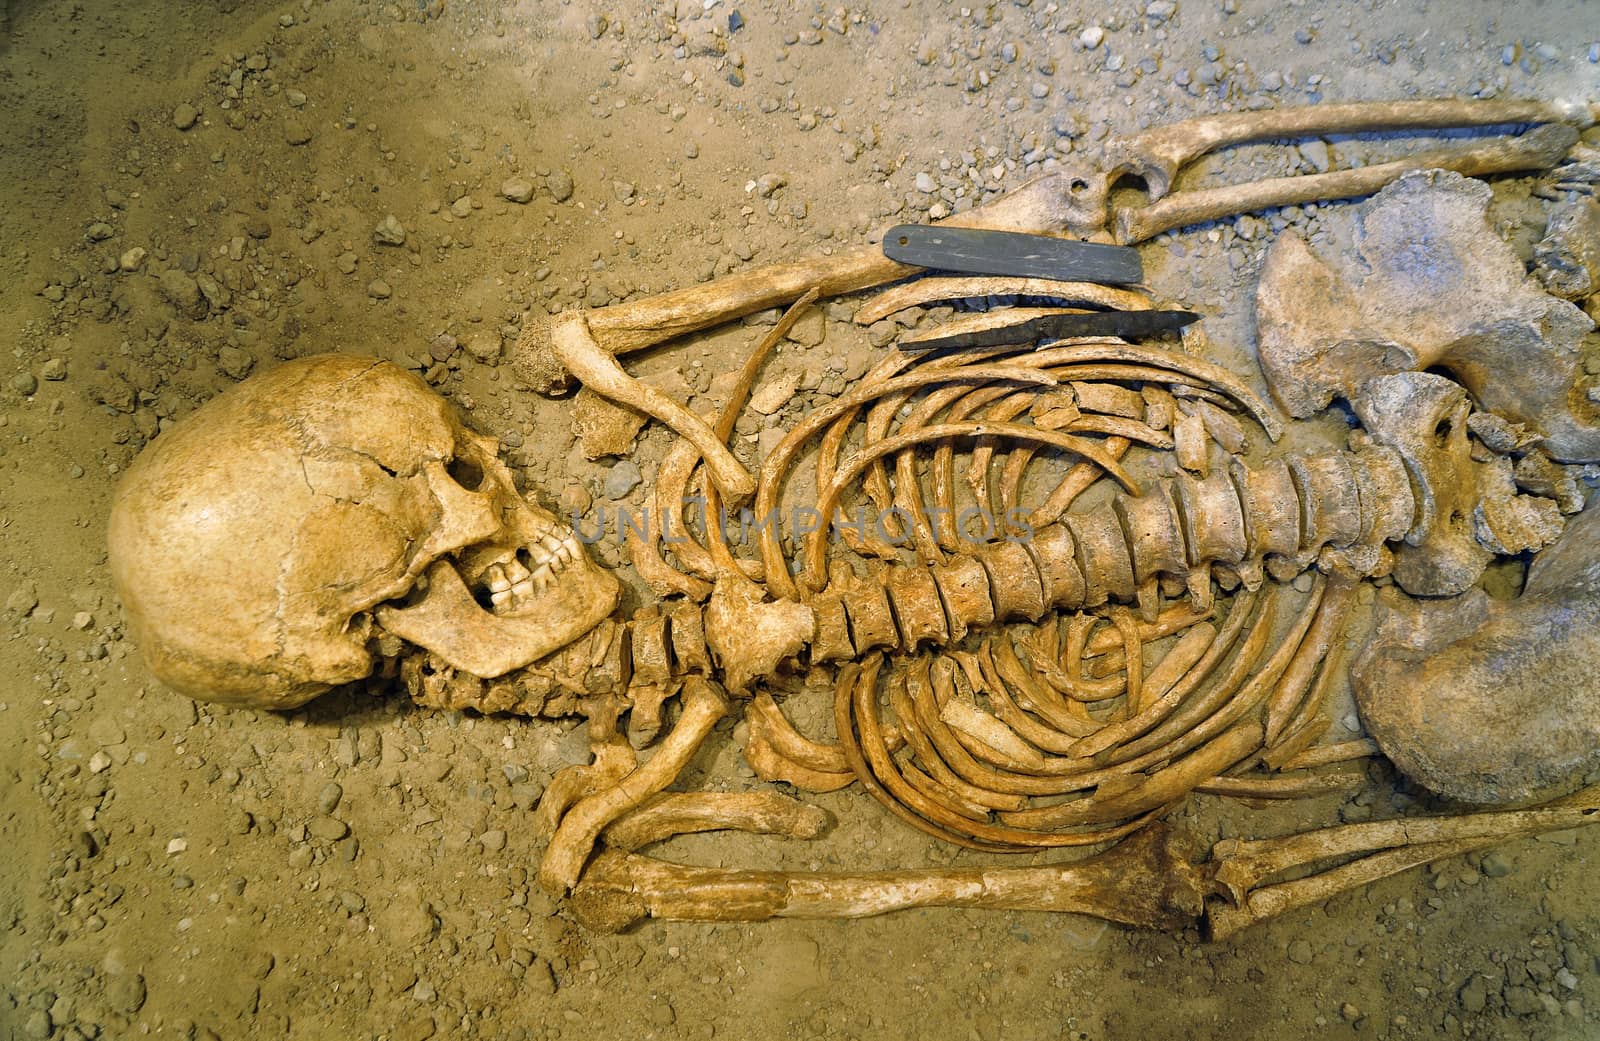 Human bones of someone curled in a grave